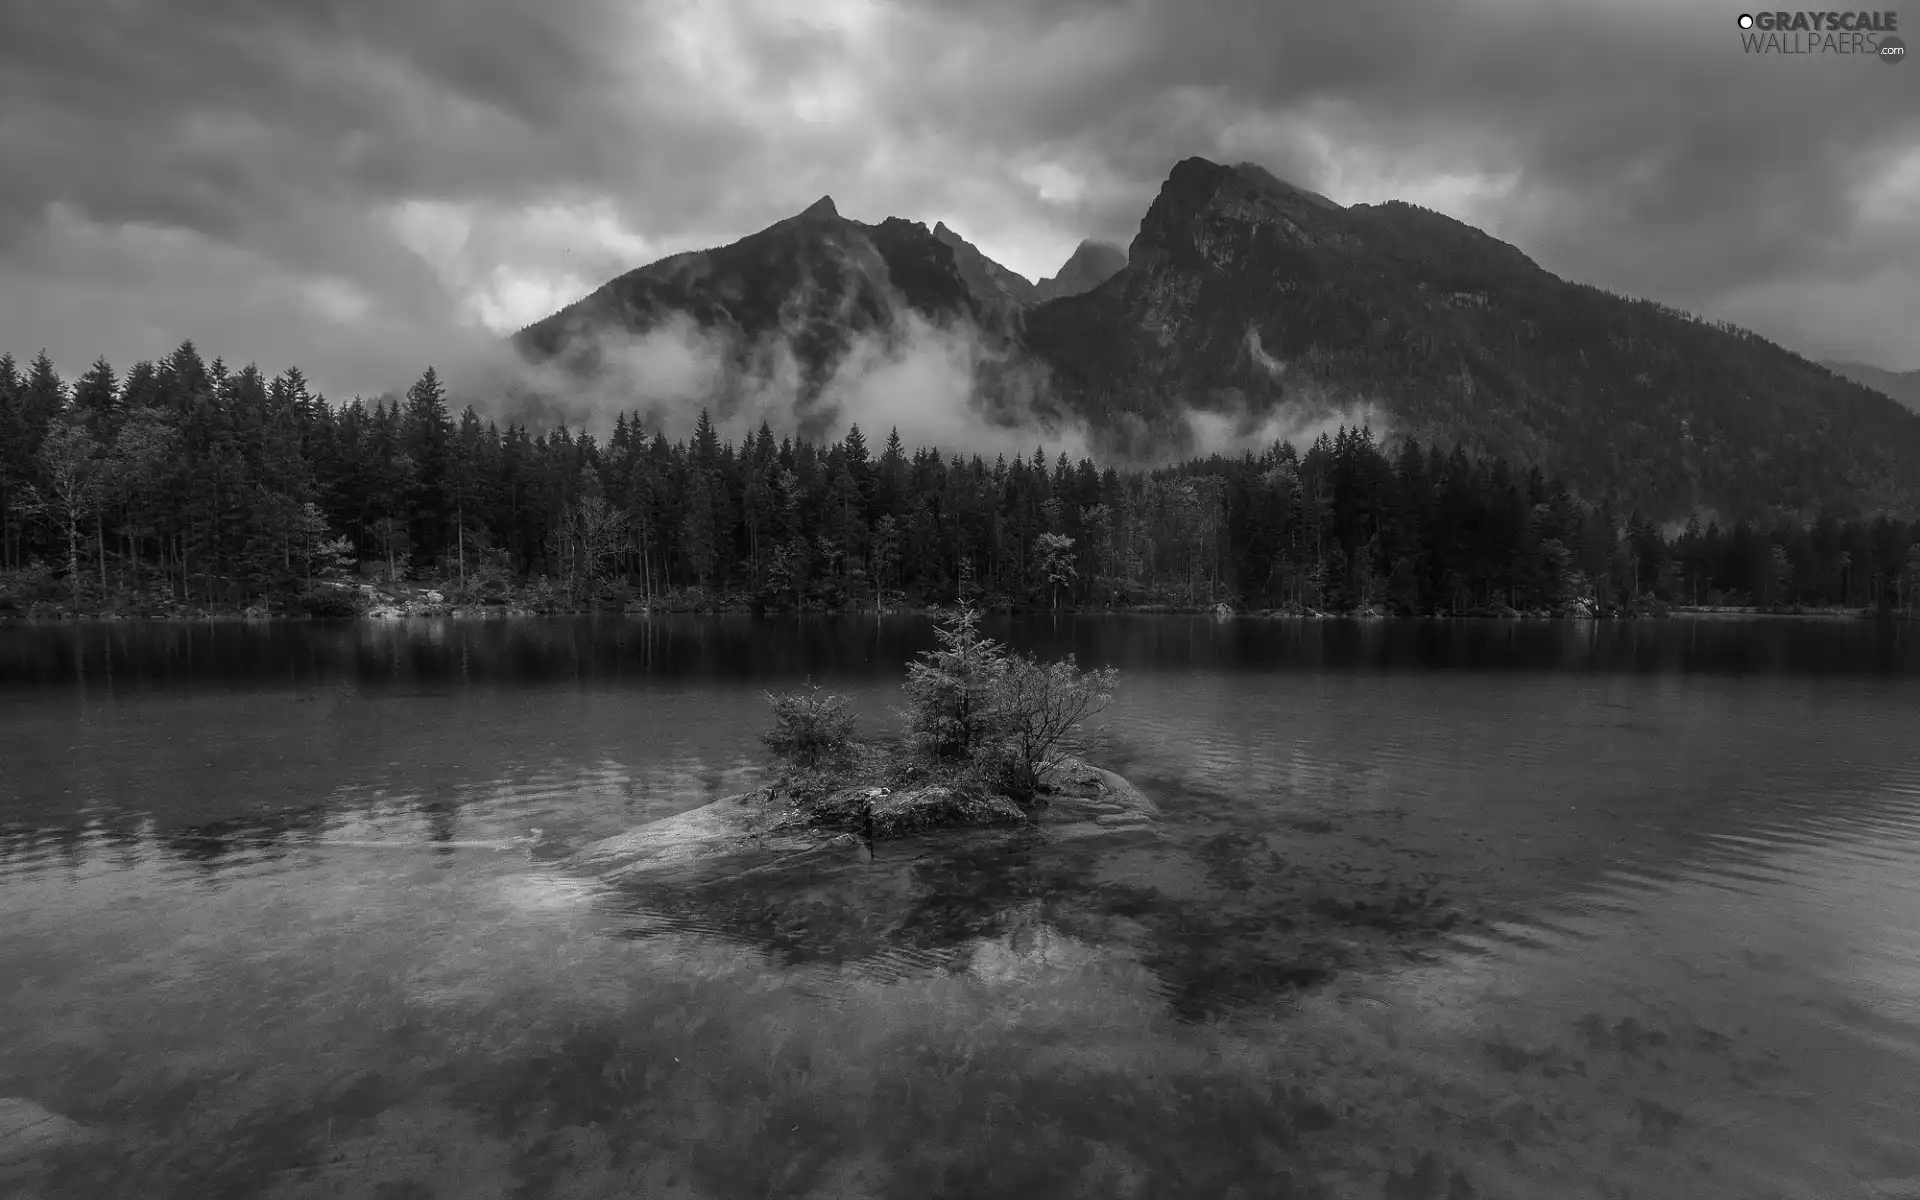 Rocks, lake, Islet, forest, reflection, clouds, viewes, Mountains, trees